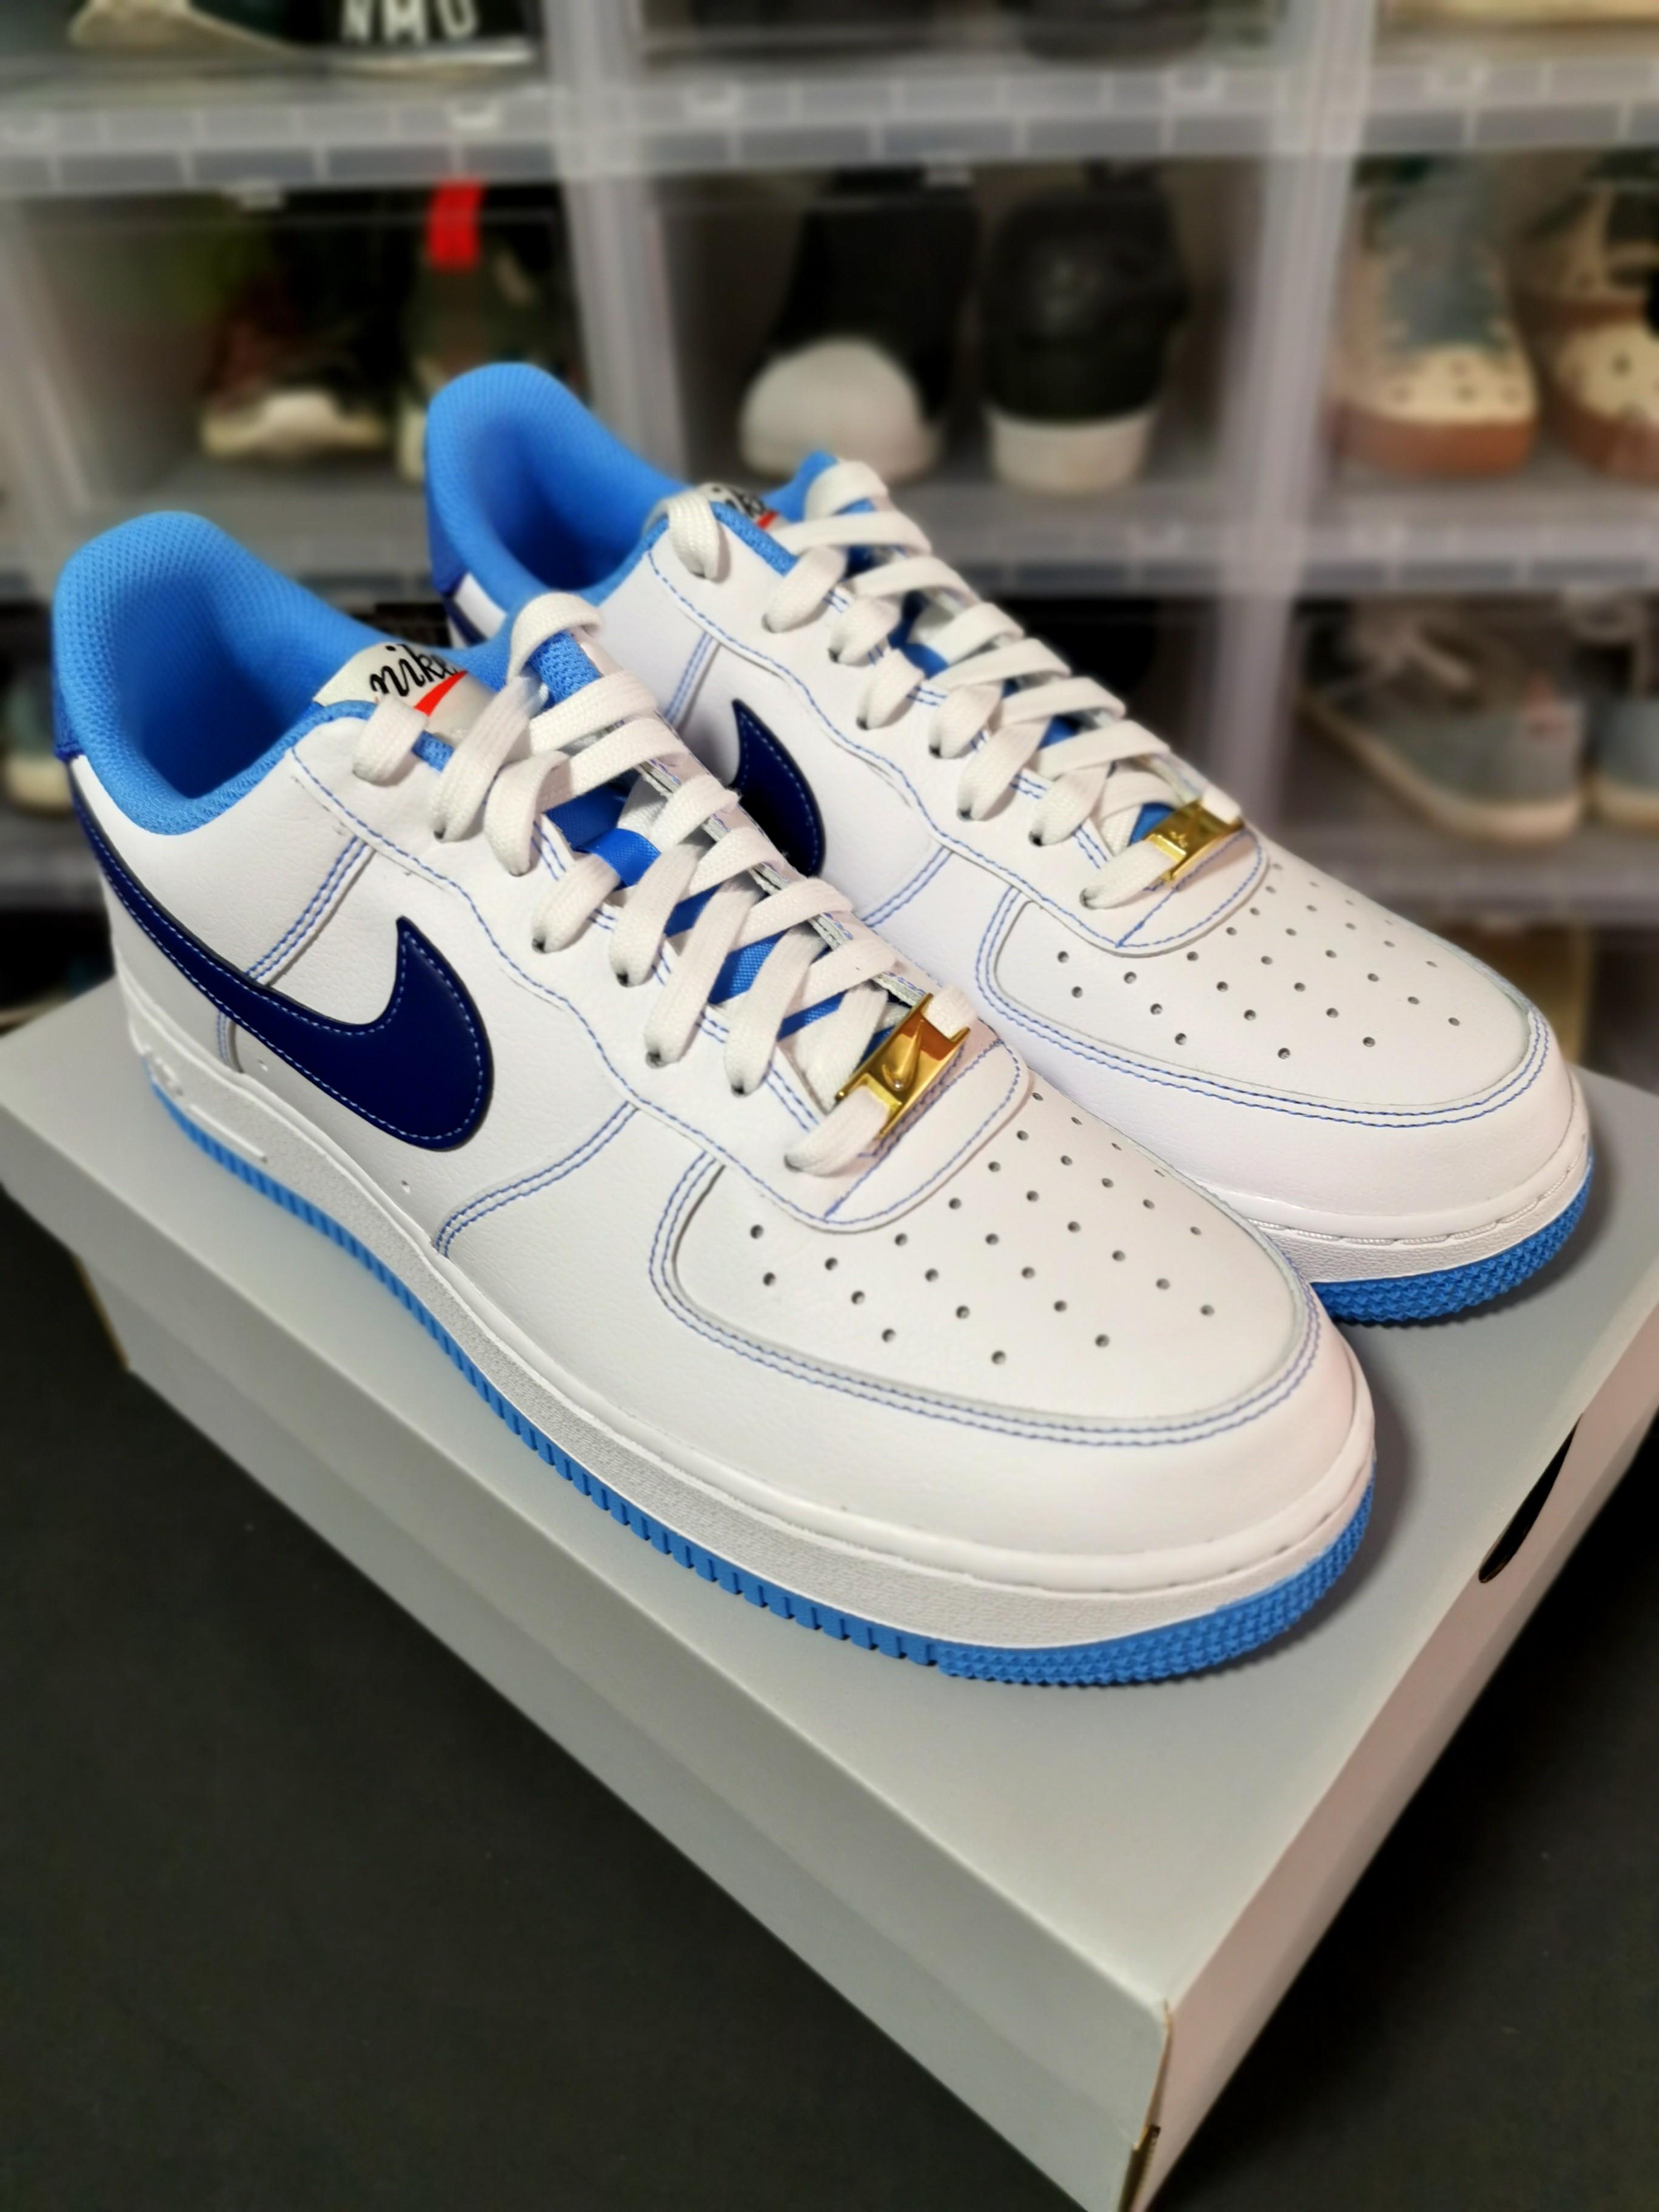 Nike Air Force 1 '07 First Use - White University Blue